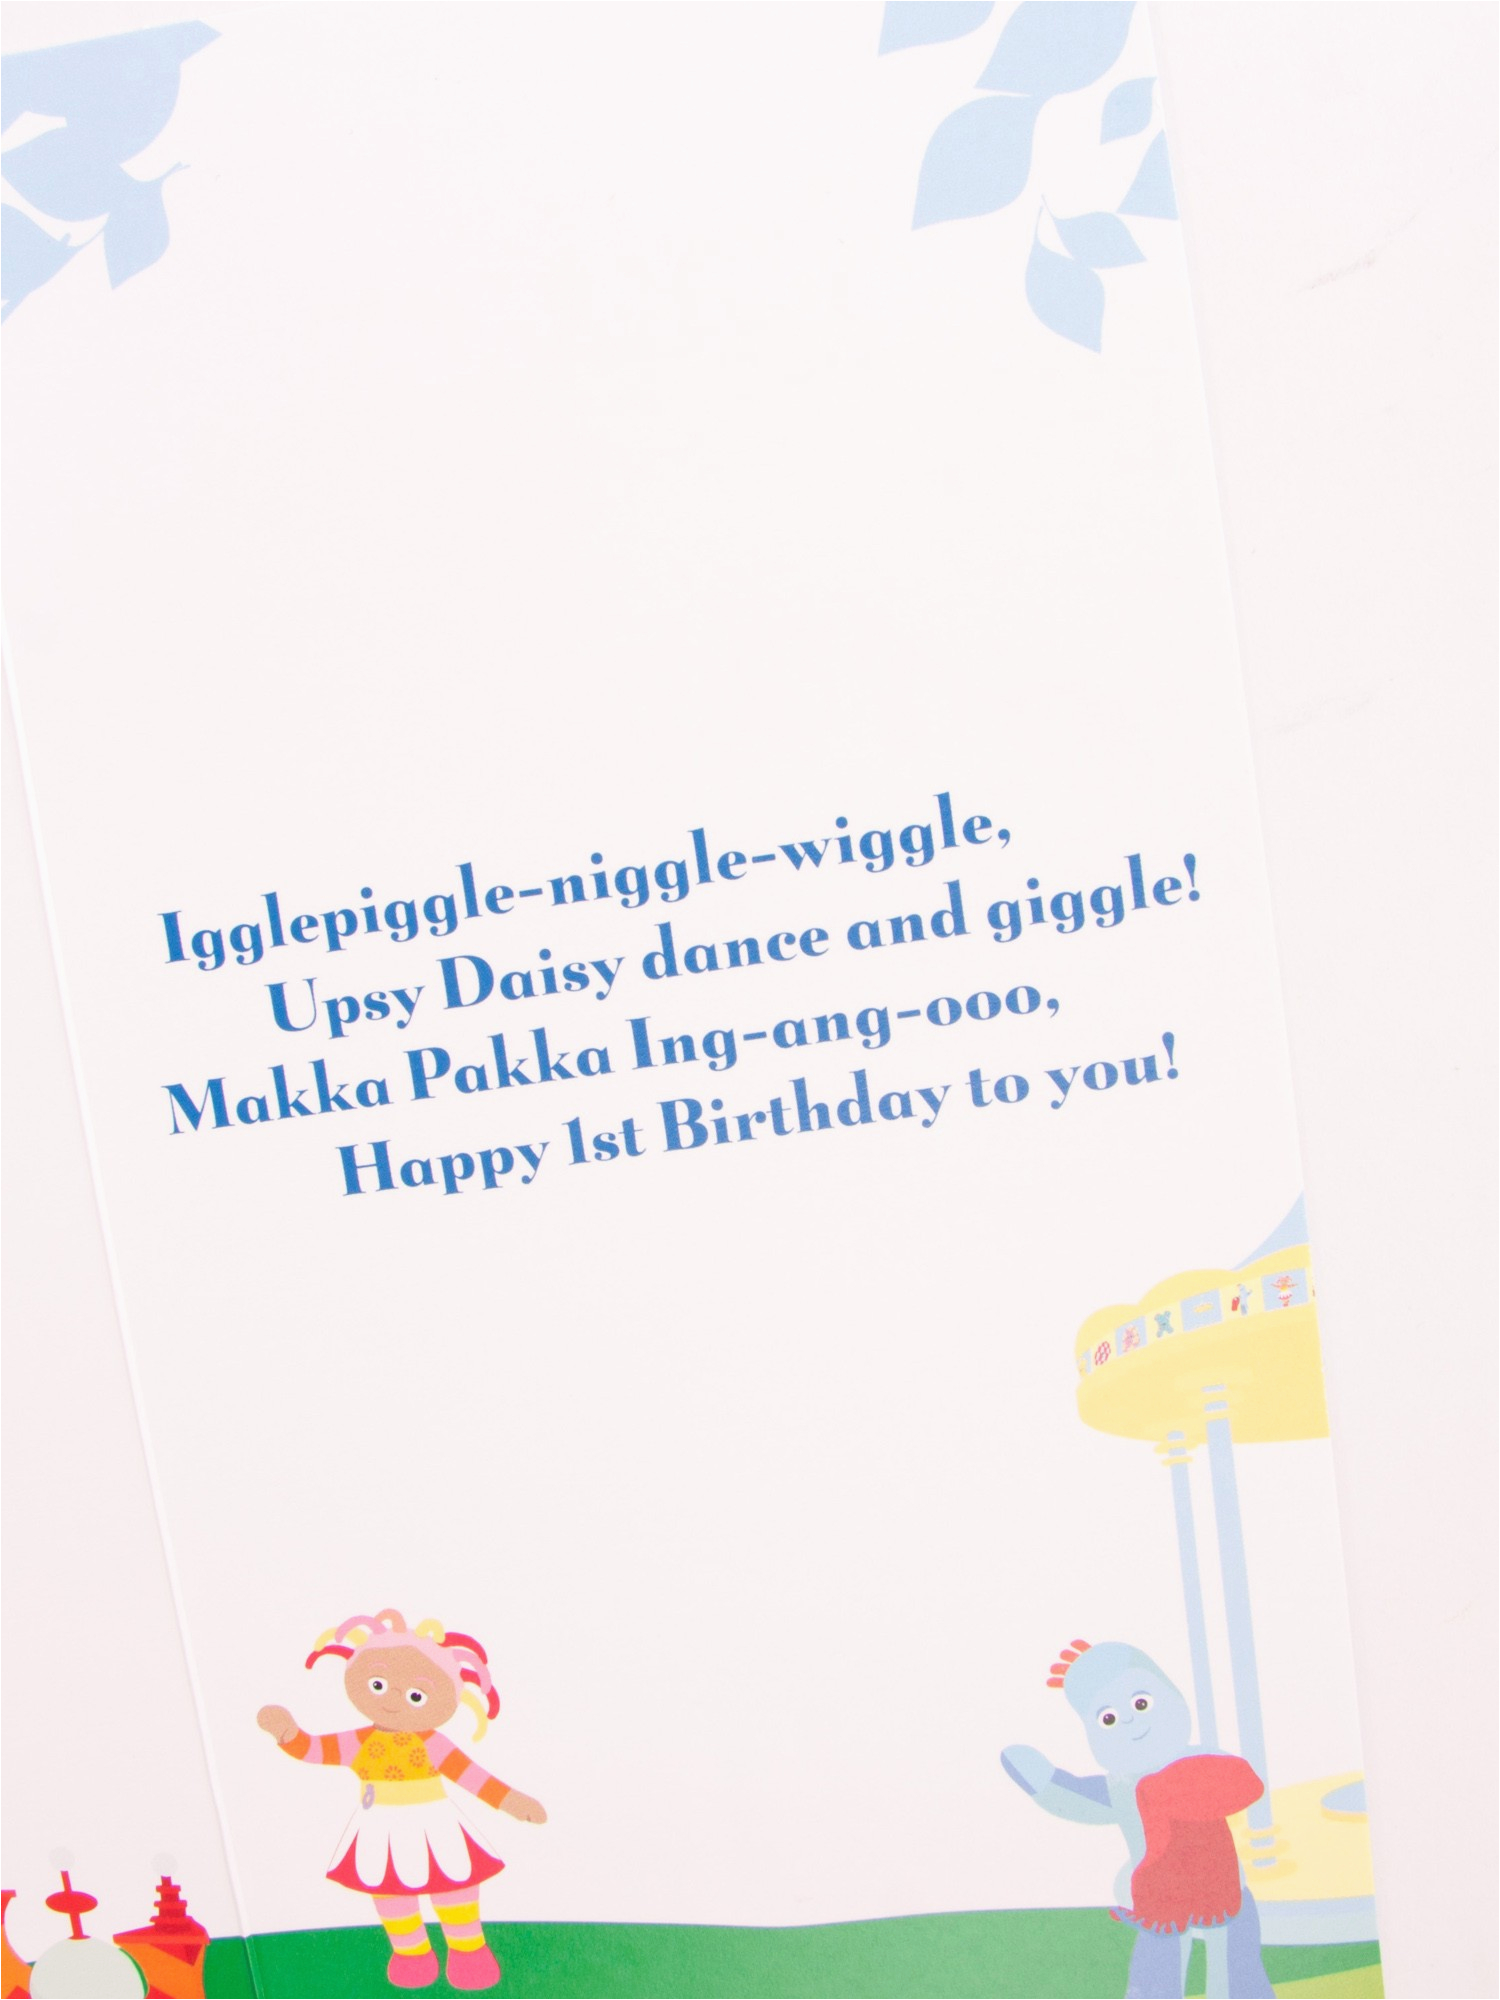 christian birthday quotes for friends quotesgram